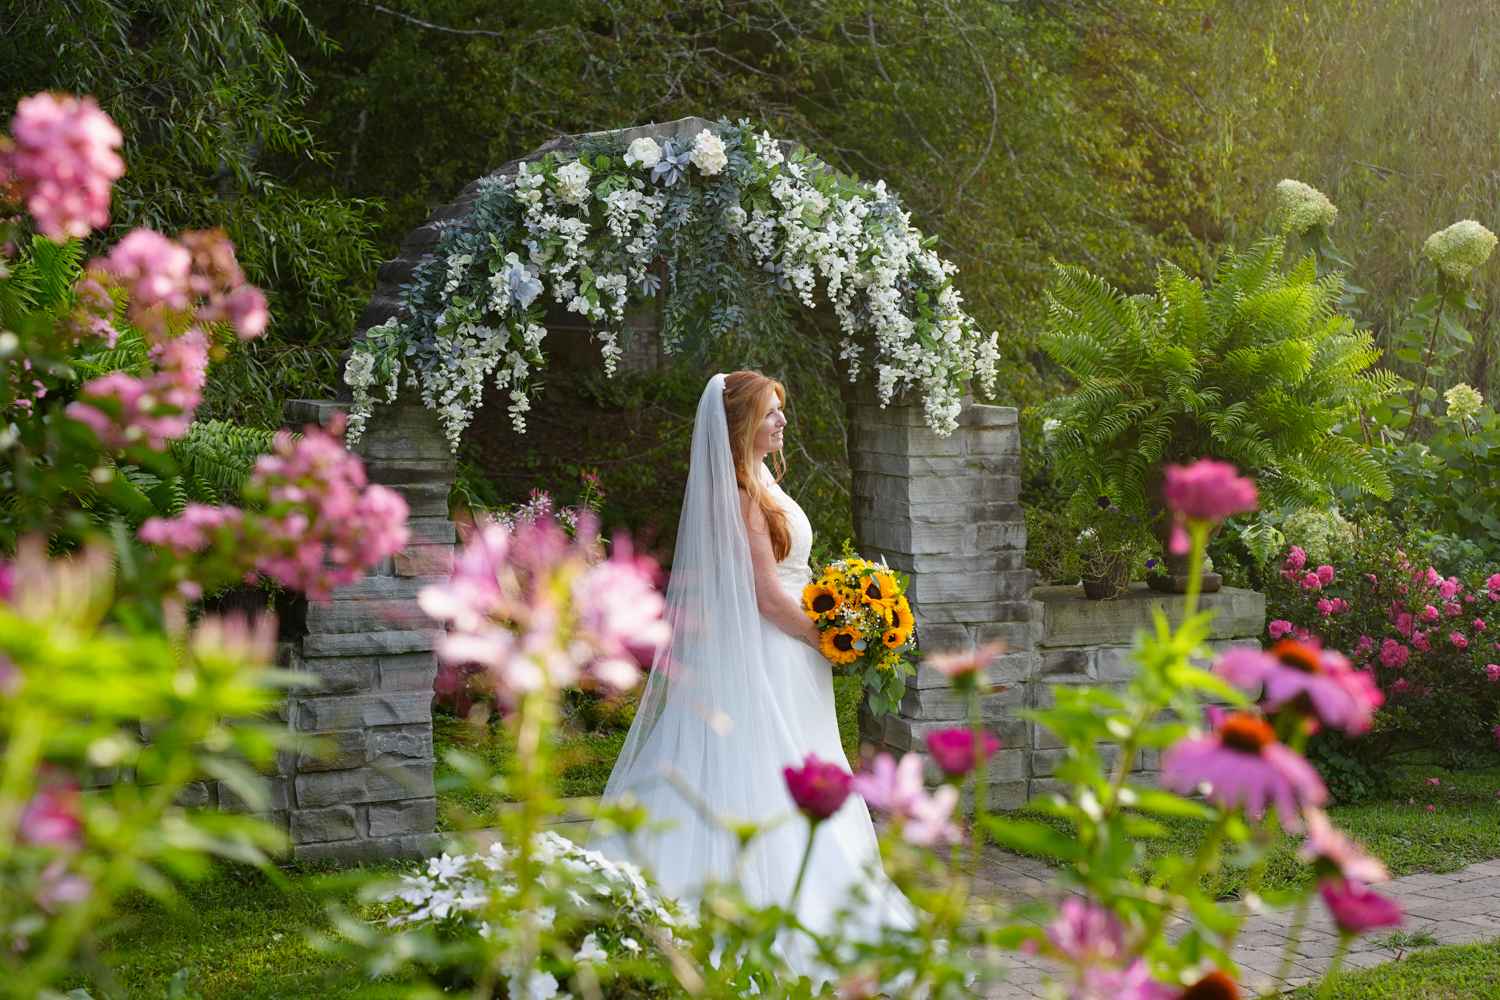 Bridal portrait at a stone arch with pink zinnia and other flowers in bloom